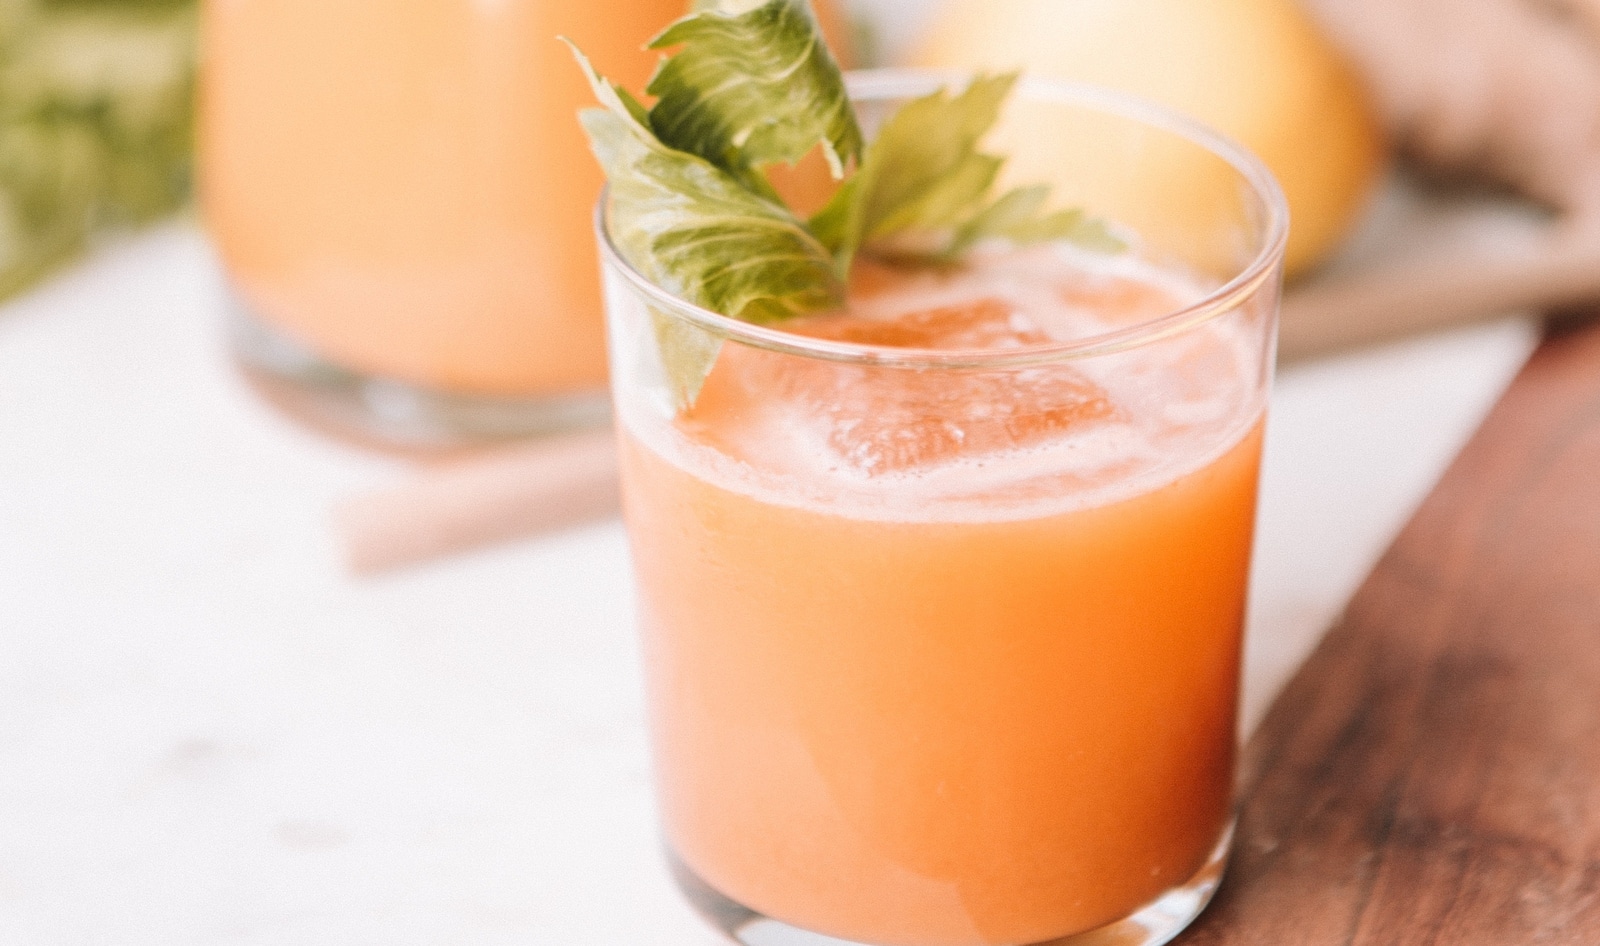 Is Carrot Juice Healthy? Here's What You Need to Know (Plus, 5 Juicers to Buy!)